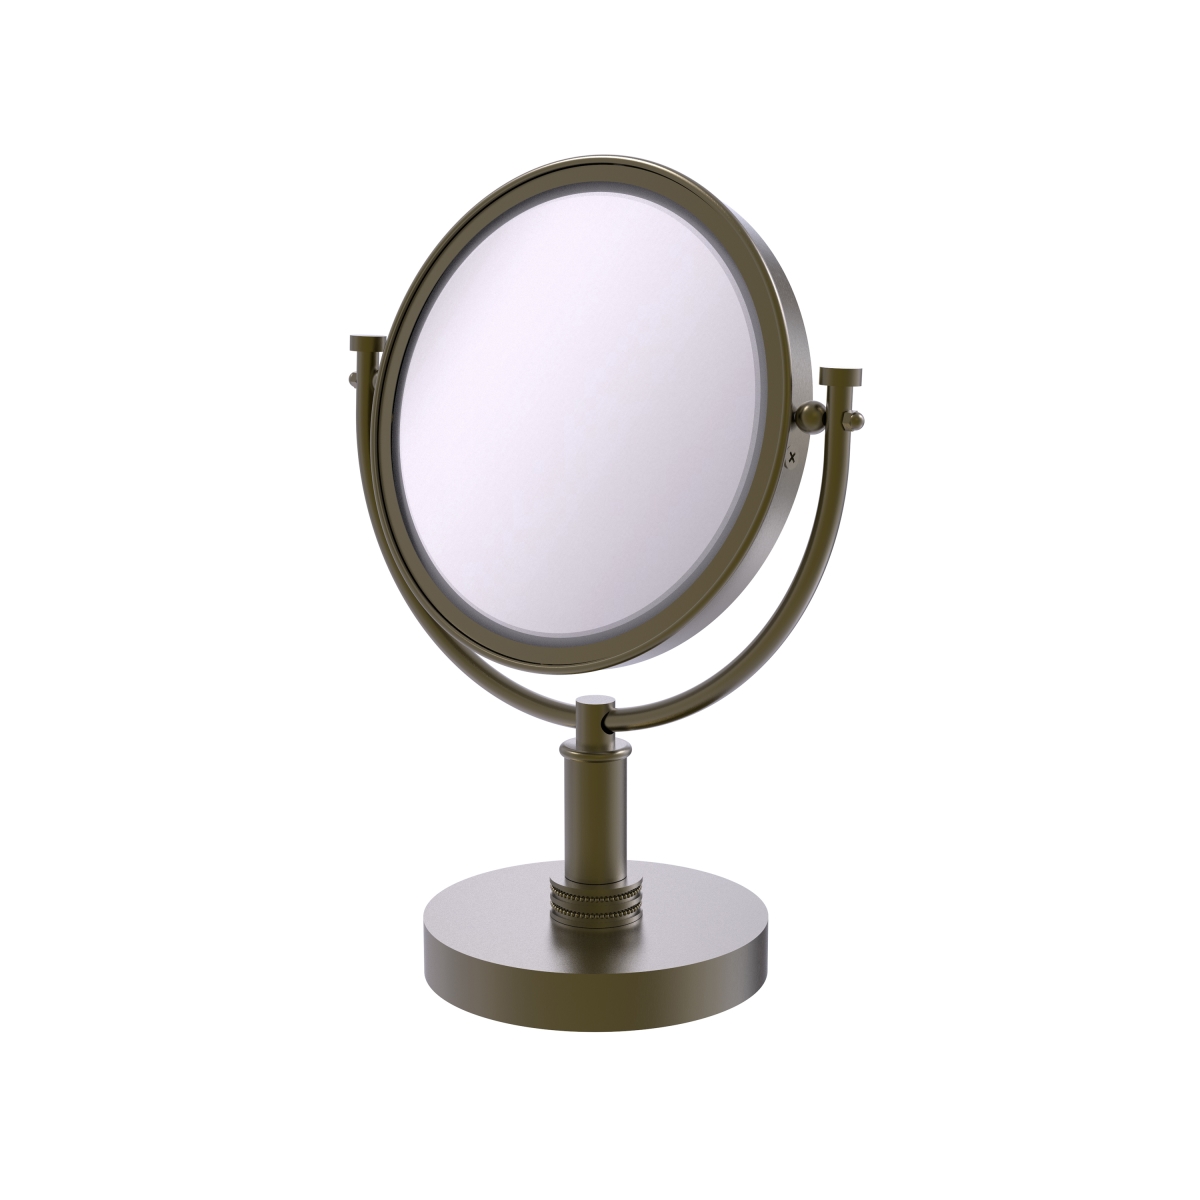 Picture of Allied Brass DM-4D-2X-ABR 8 in. Vanity Top Make-Up Mirror 2X Magnification, Antique Brass - 15 x 8 x 8 in.